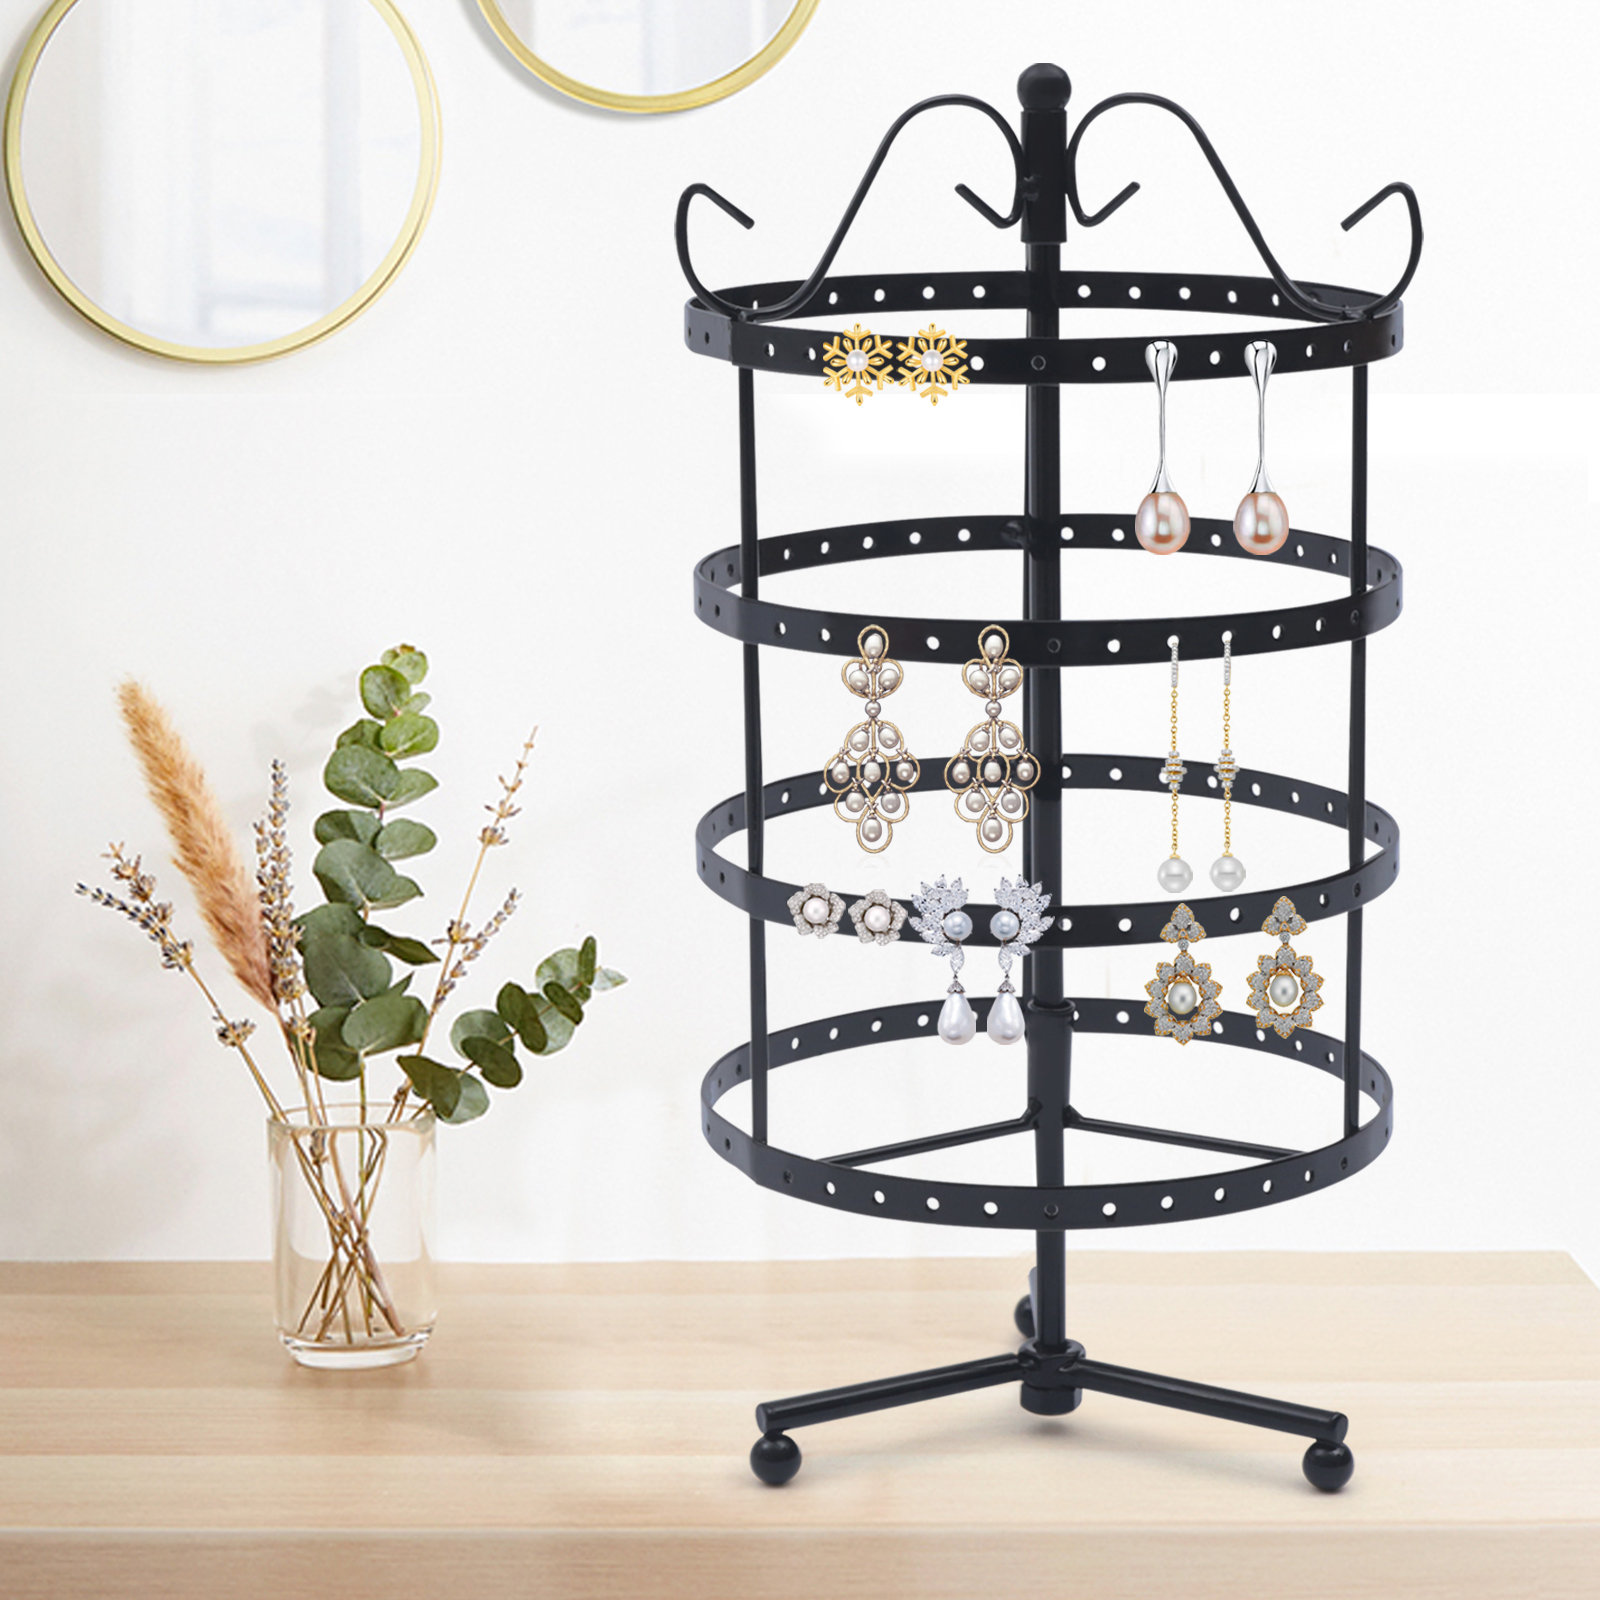 Hanging Display Storage Rack Tree for Earrings Bracelets Necklaces Bronze Girls & Women Earring Necklace Holder Organizer w/ 144 Holes Flexzion Jewelry Tower Display Antique Birdcage Copper Stand 